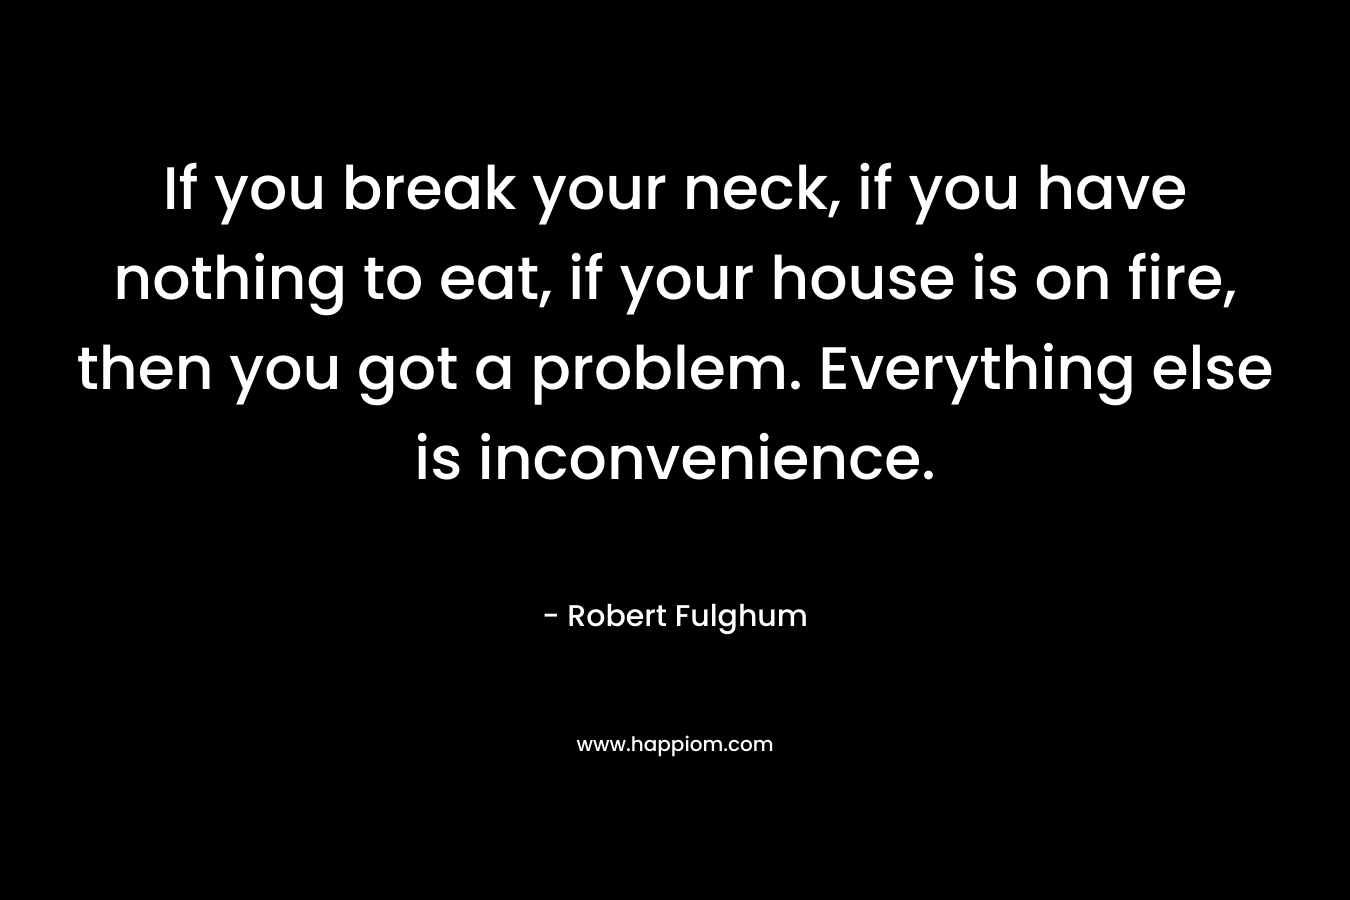 If you break your neck, if you have nothing to eat, if your house is on fire, then you got a problem. Everything else is inconvenience.